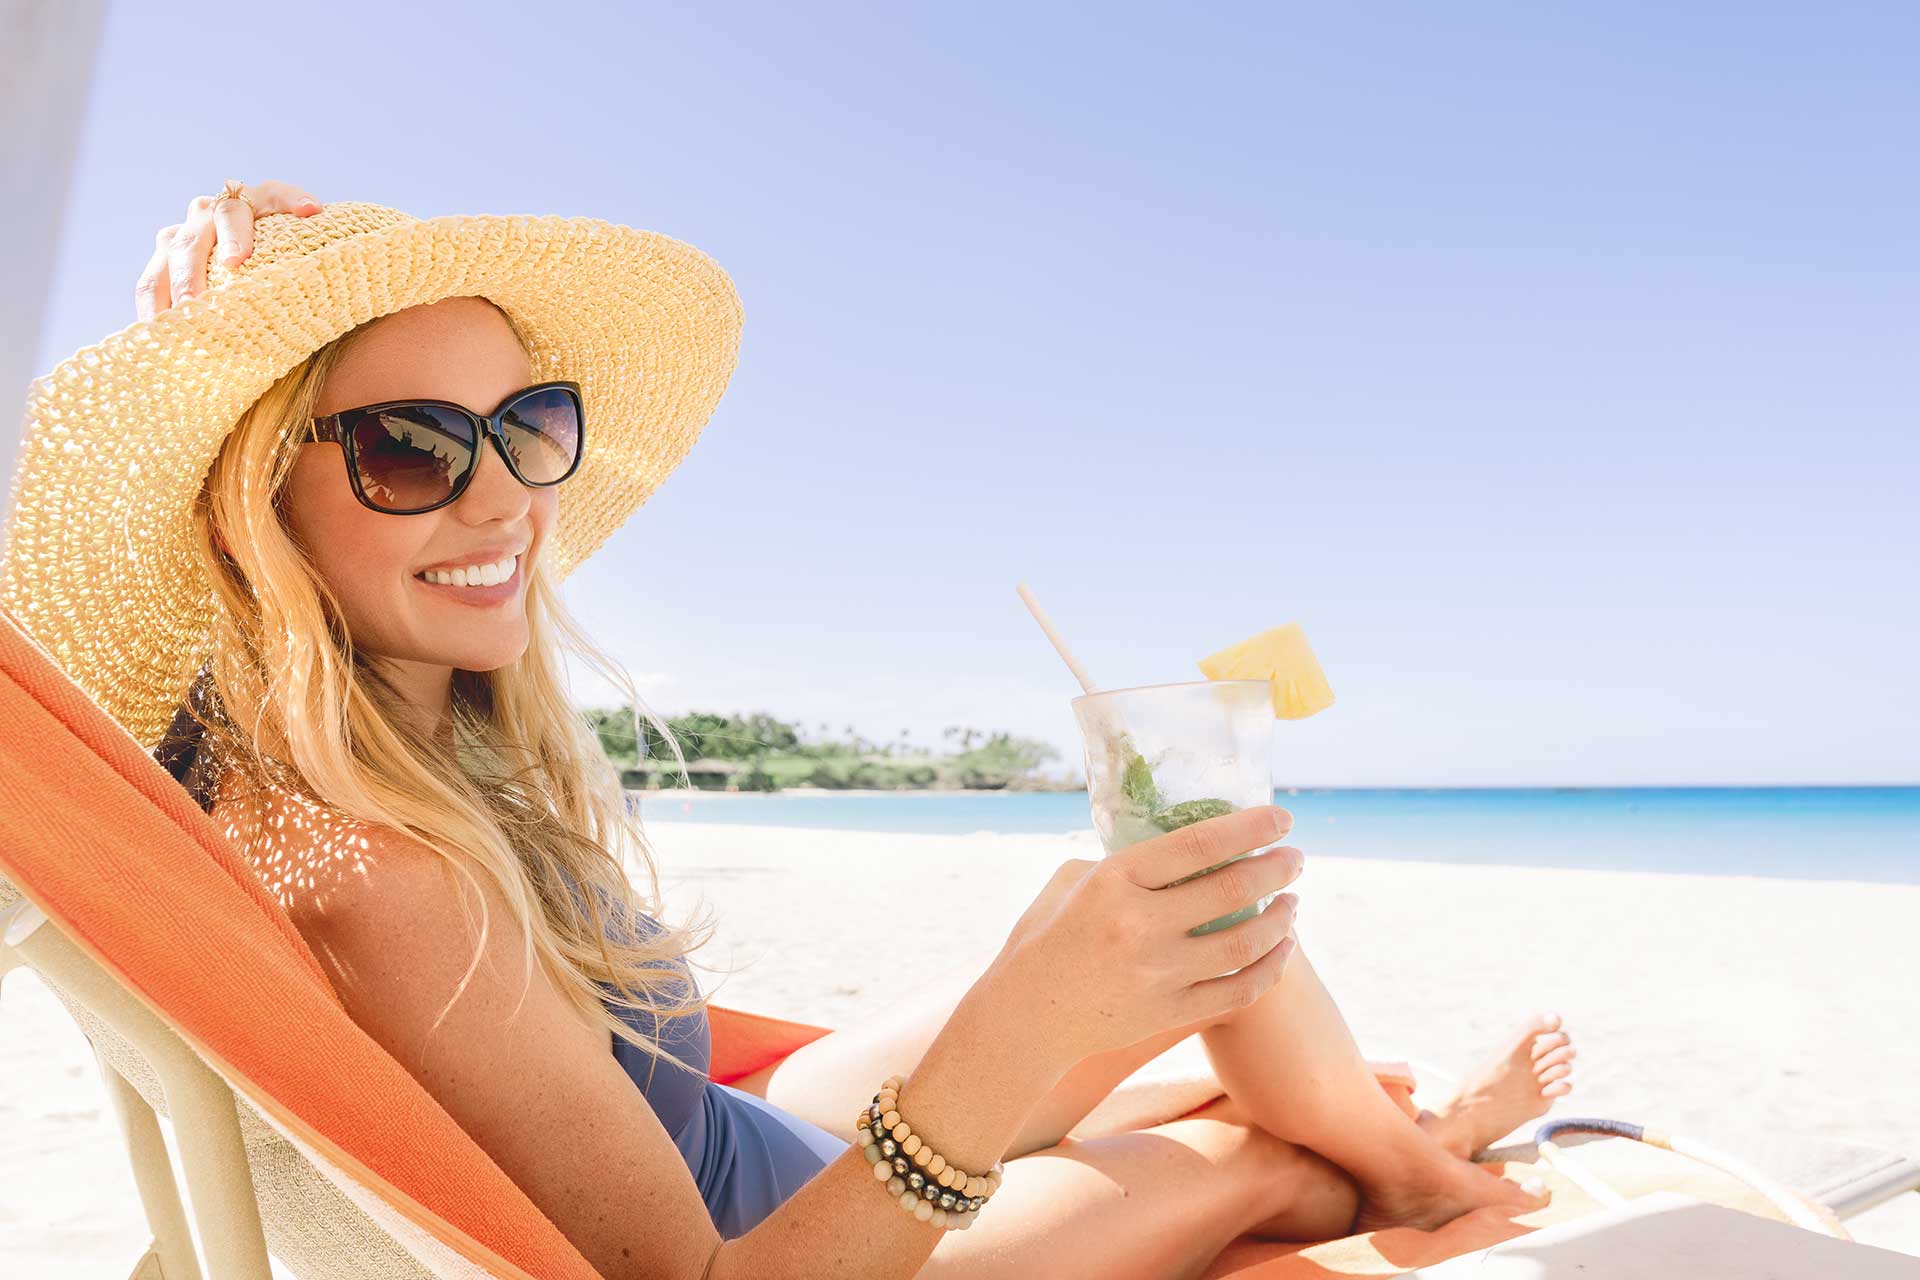 Women on beach in hawaii with beverage